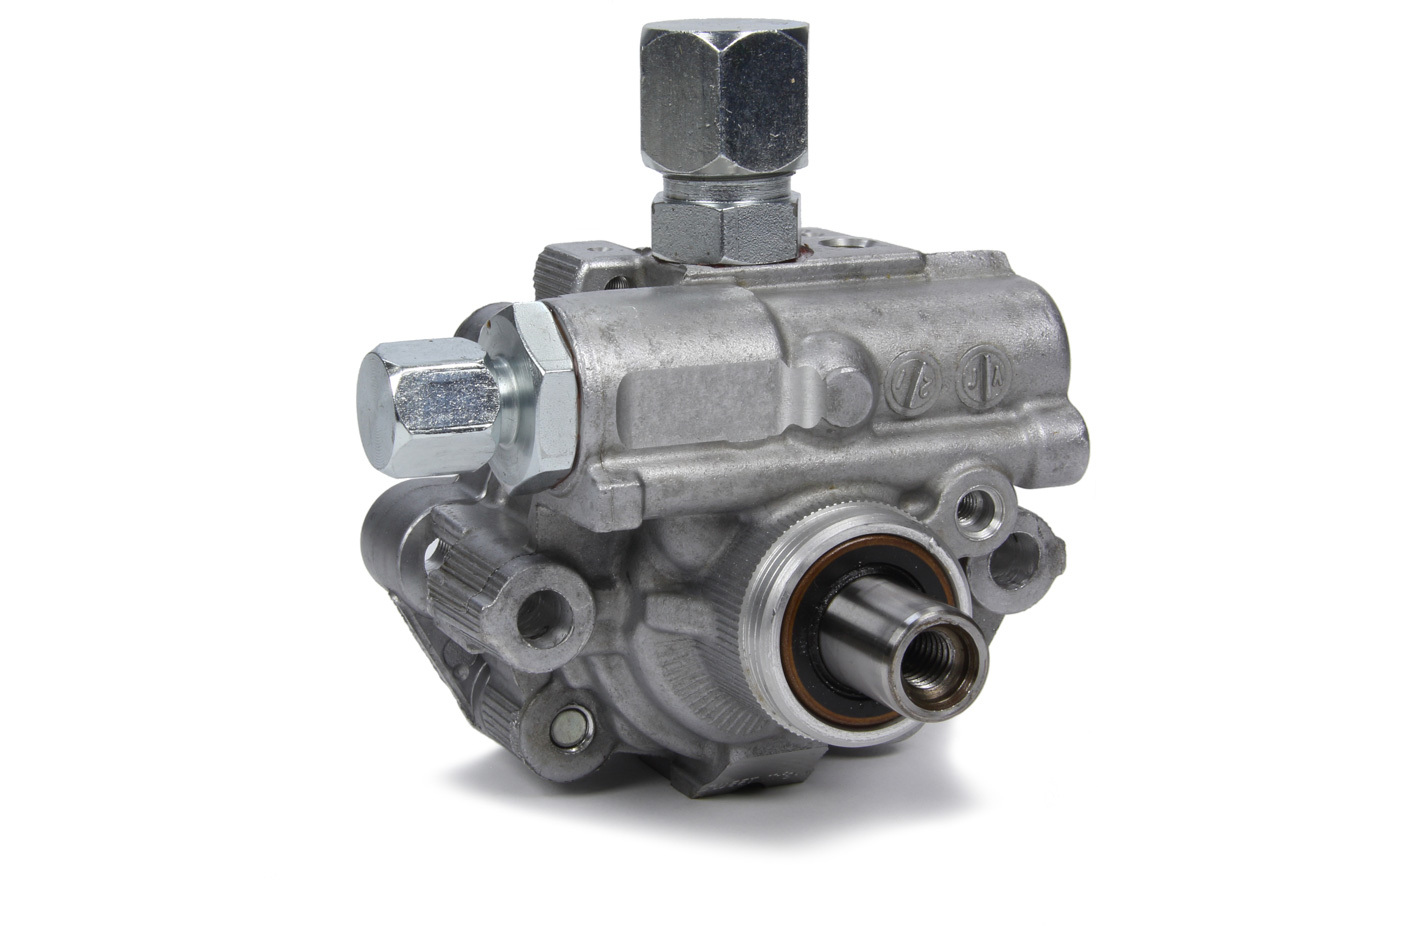 Sweet Manufacturing 305-80830 Power Steering Pump, 3 gpm, 1700 psi, Natural, Each